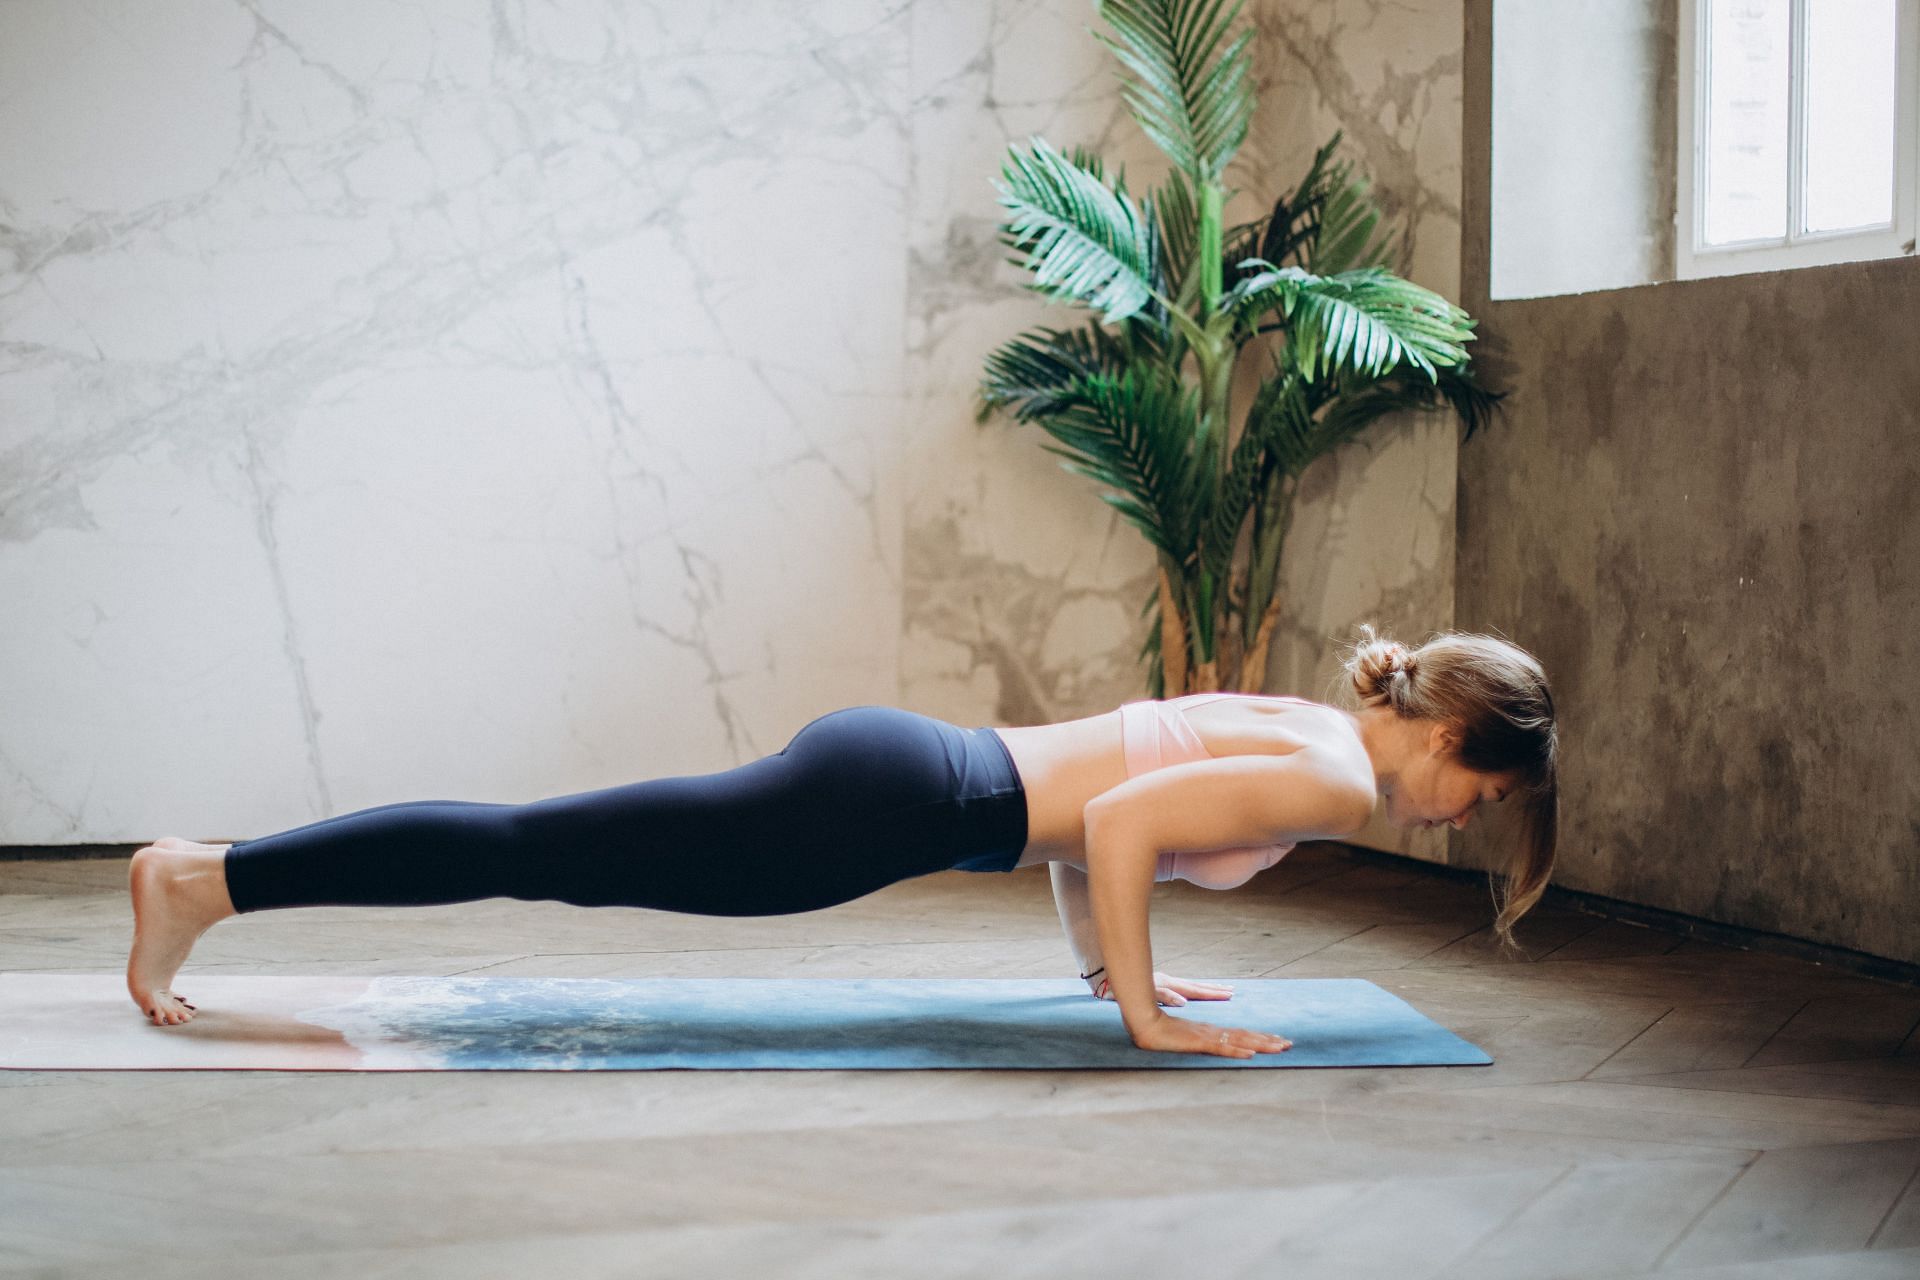 Regularly performing planks can assist to improve your posture, warm up your core for other workouts, and reduce the risk of injury. (Image via Pexels/ Elina Fairytale)